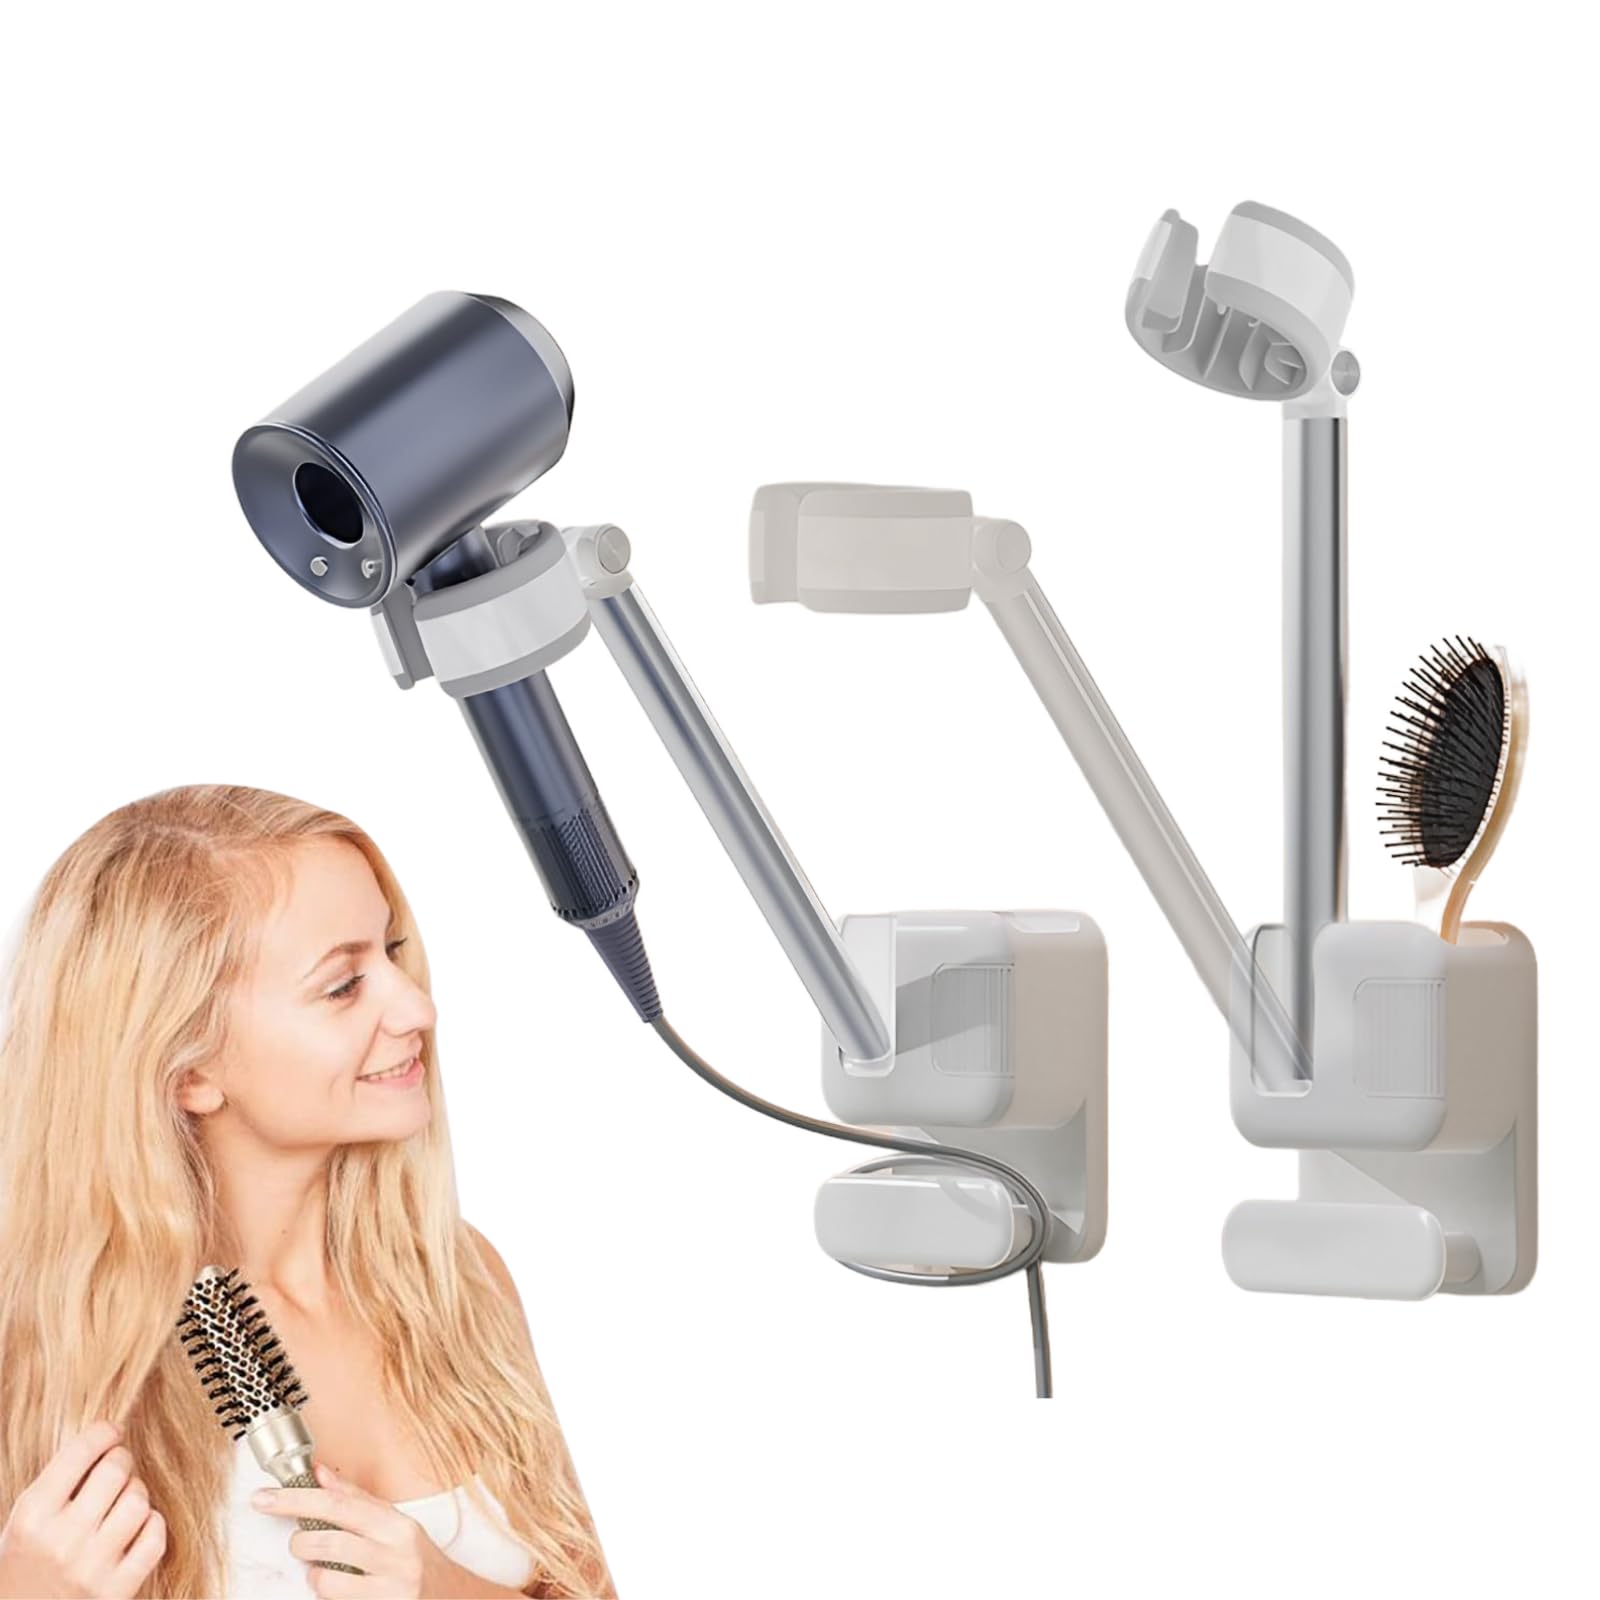 Lazy Hair Dryer Bracket Hands-Free Hair Dryer Holder Adjustable, Bathroom Wall Mount Blow Dryer Holder with Cable Hanger, Firmly Installed on The Wall or Mirror Easy Installation White